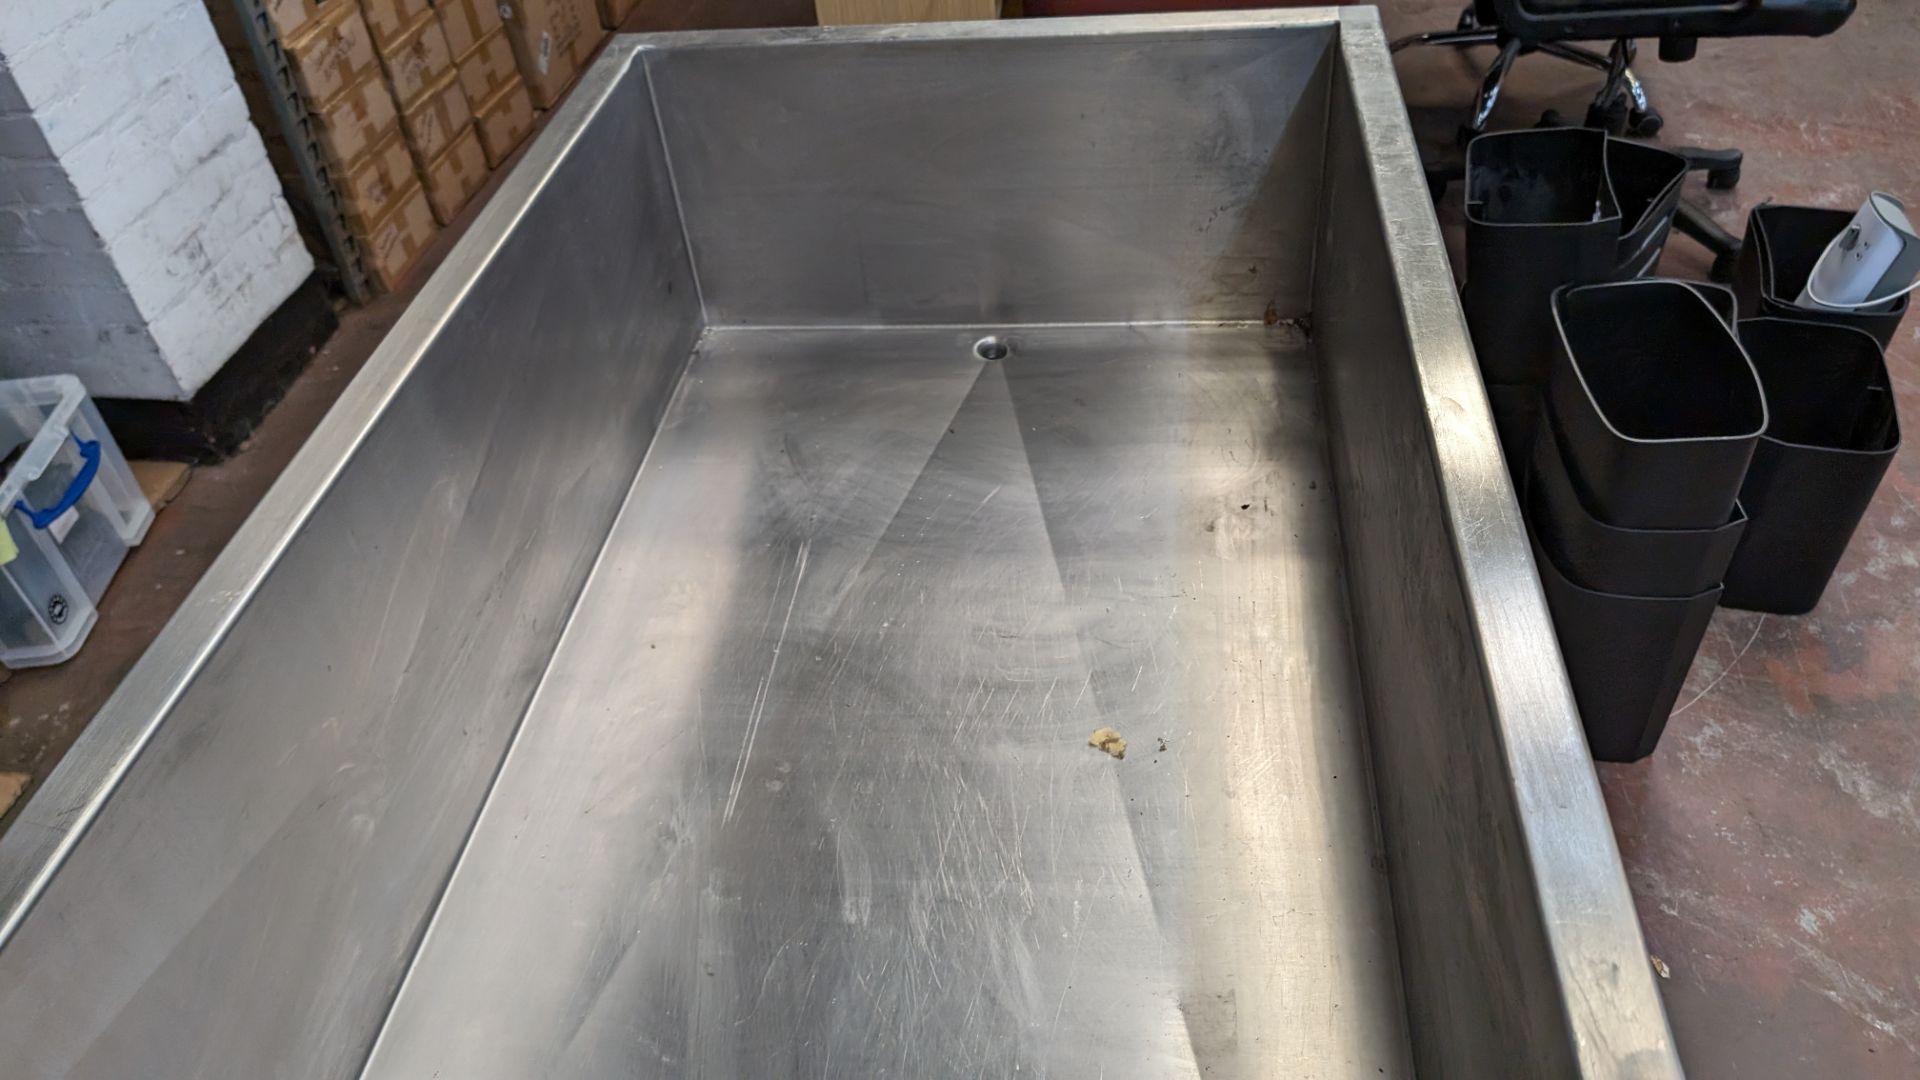 Mobile mozzarella hardening tank. Understood to have been bought in 2018 - Image 5 of 11